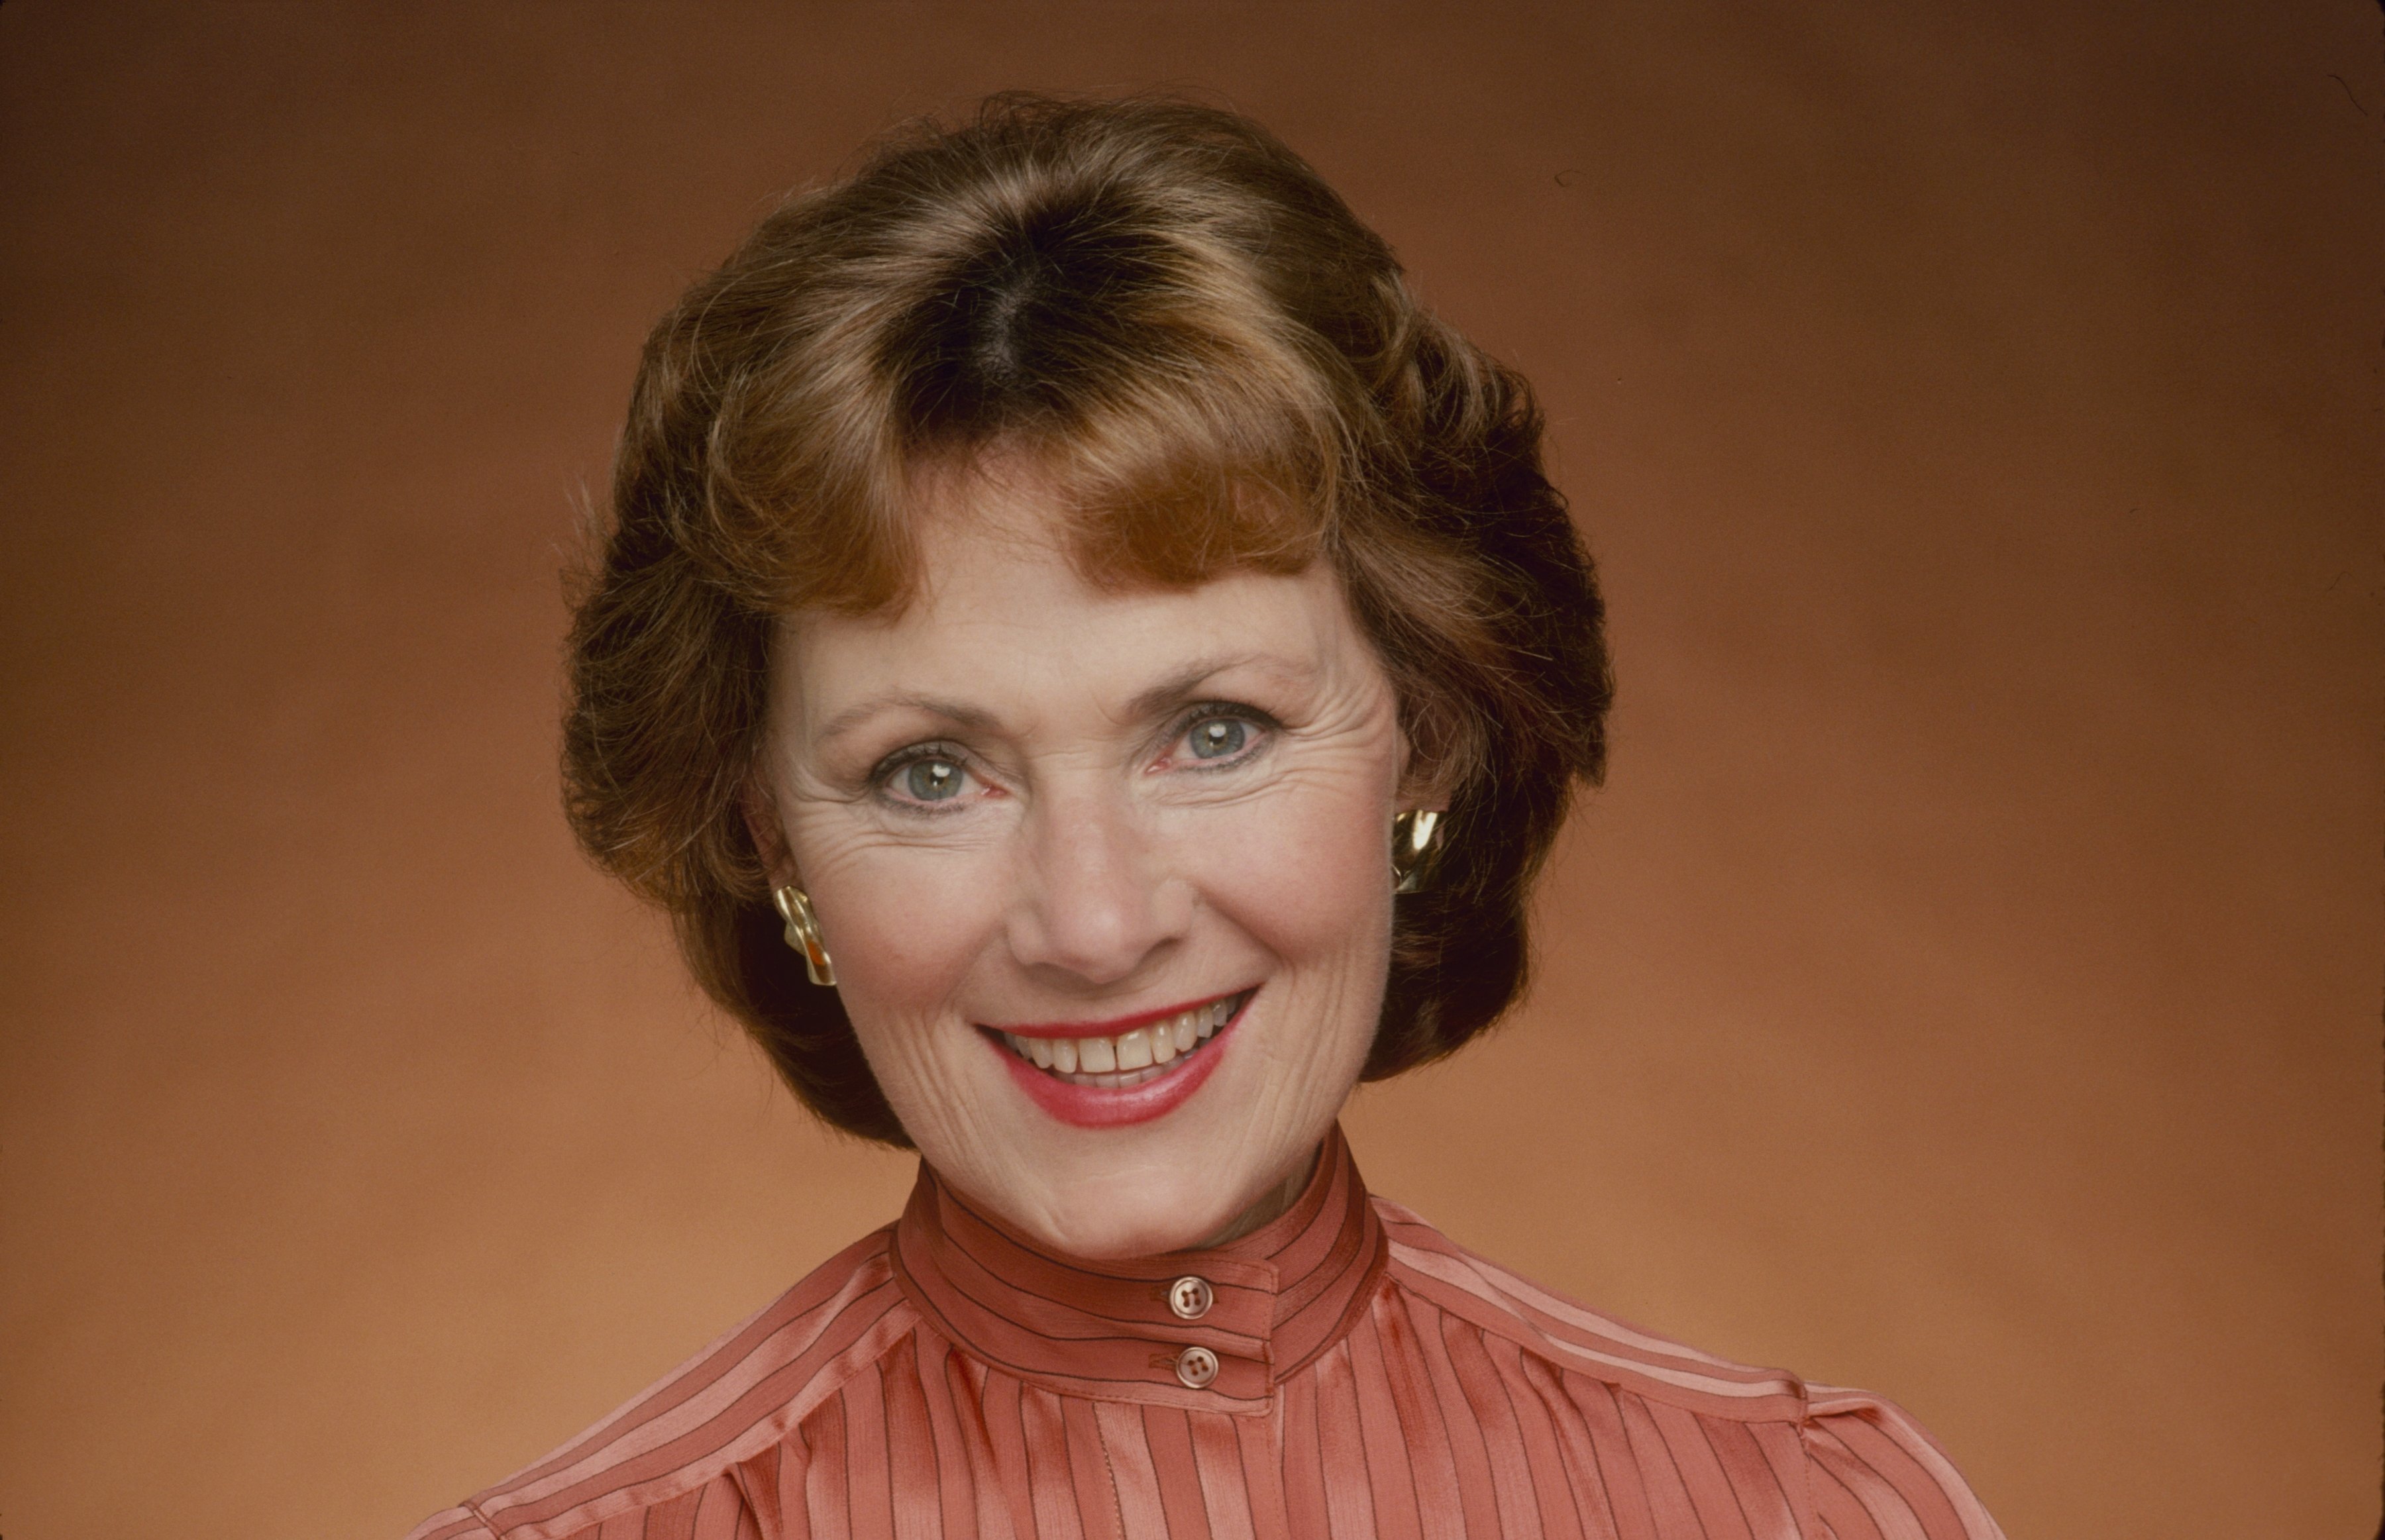 Marion Ross as "Marion Cunningham on "Happy Days" in August 1983 | Source: Getty Images